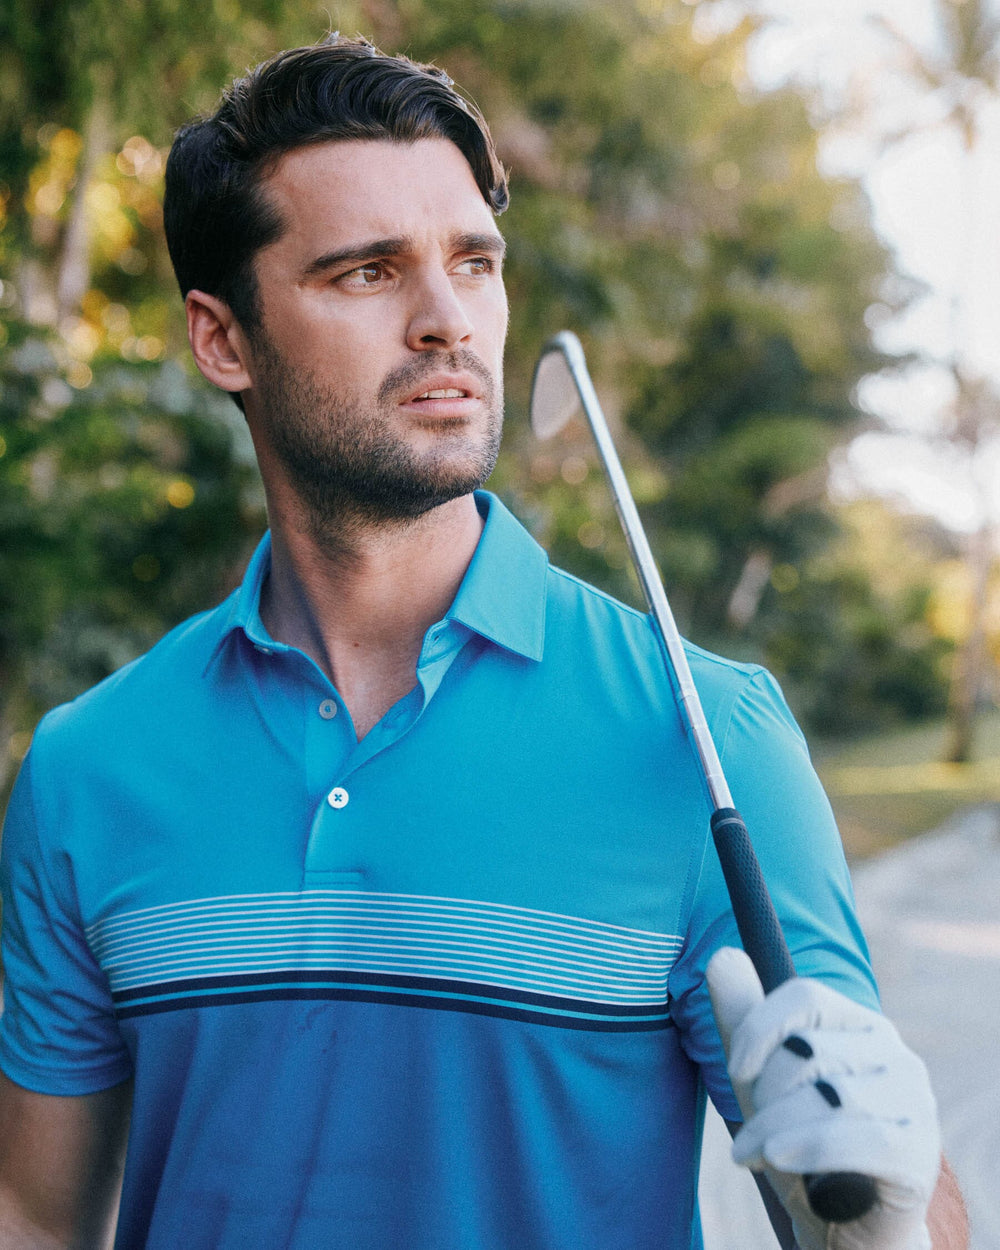 The lifestyle view of the Southern Tide Driver Wildwood Stripe Polo Shirt by Southern Tide - Boat Blue